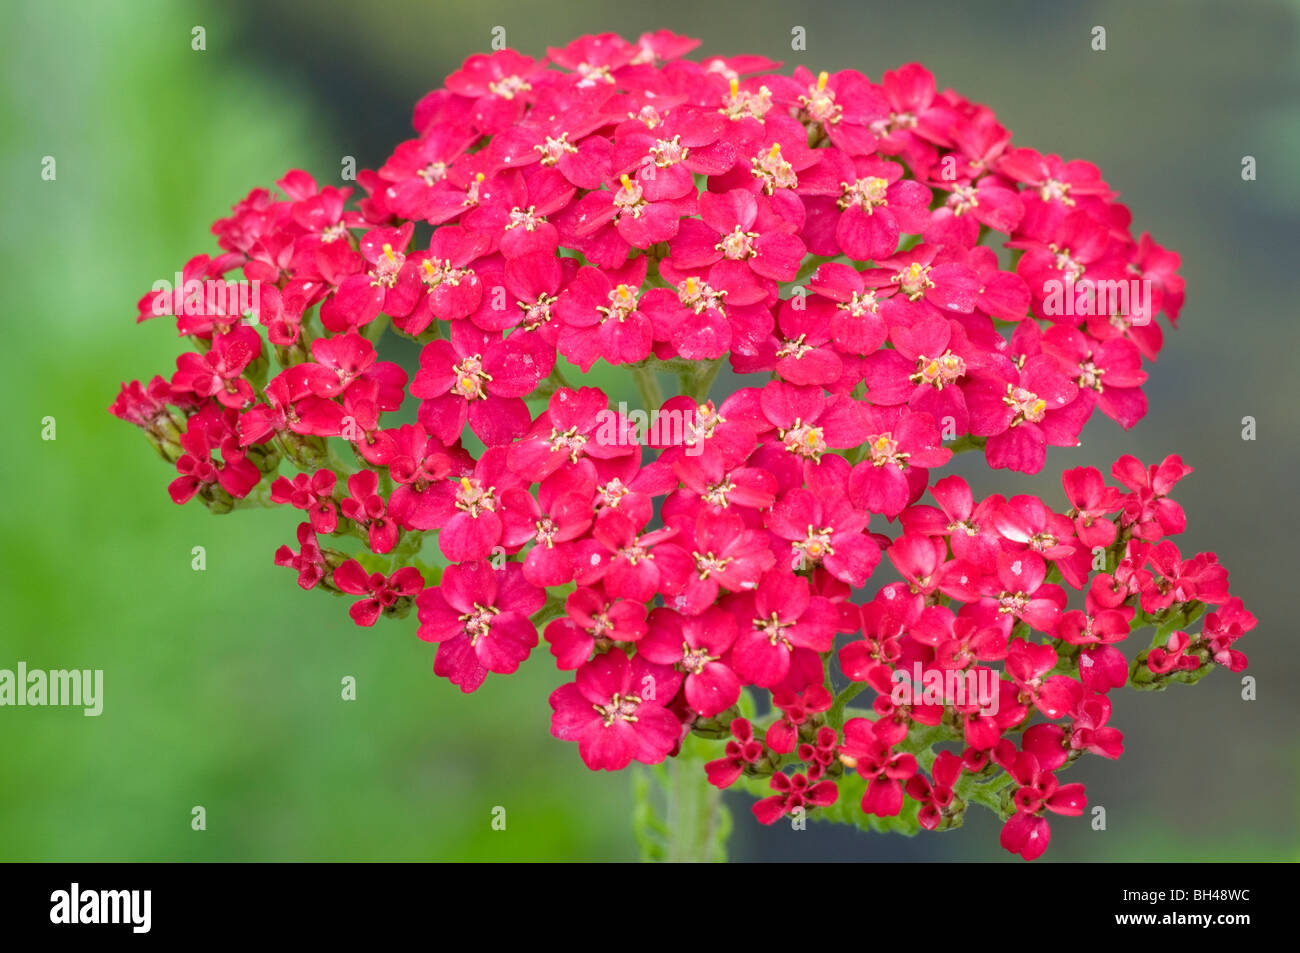 Achillea 'The Beacon'. Close up image of bright red flower cluster. Stock Photo